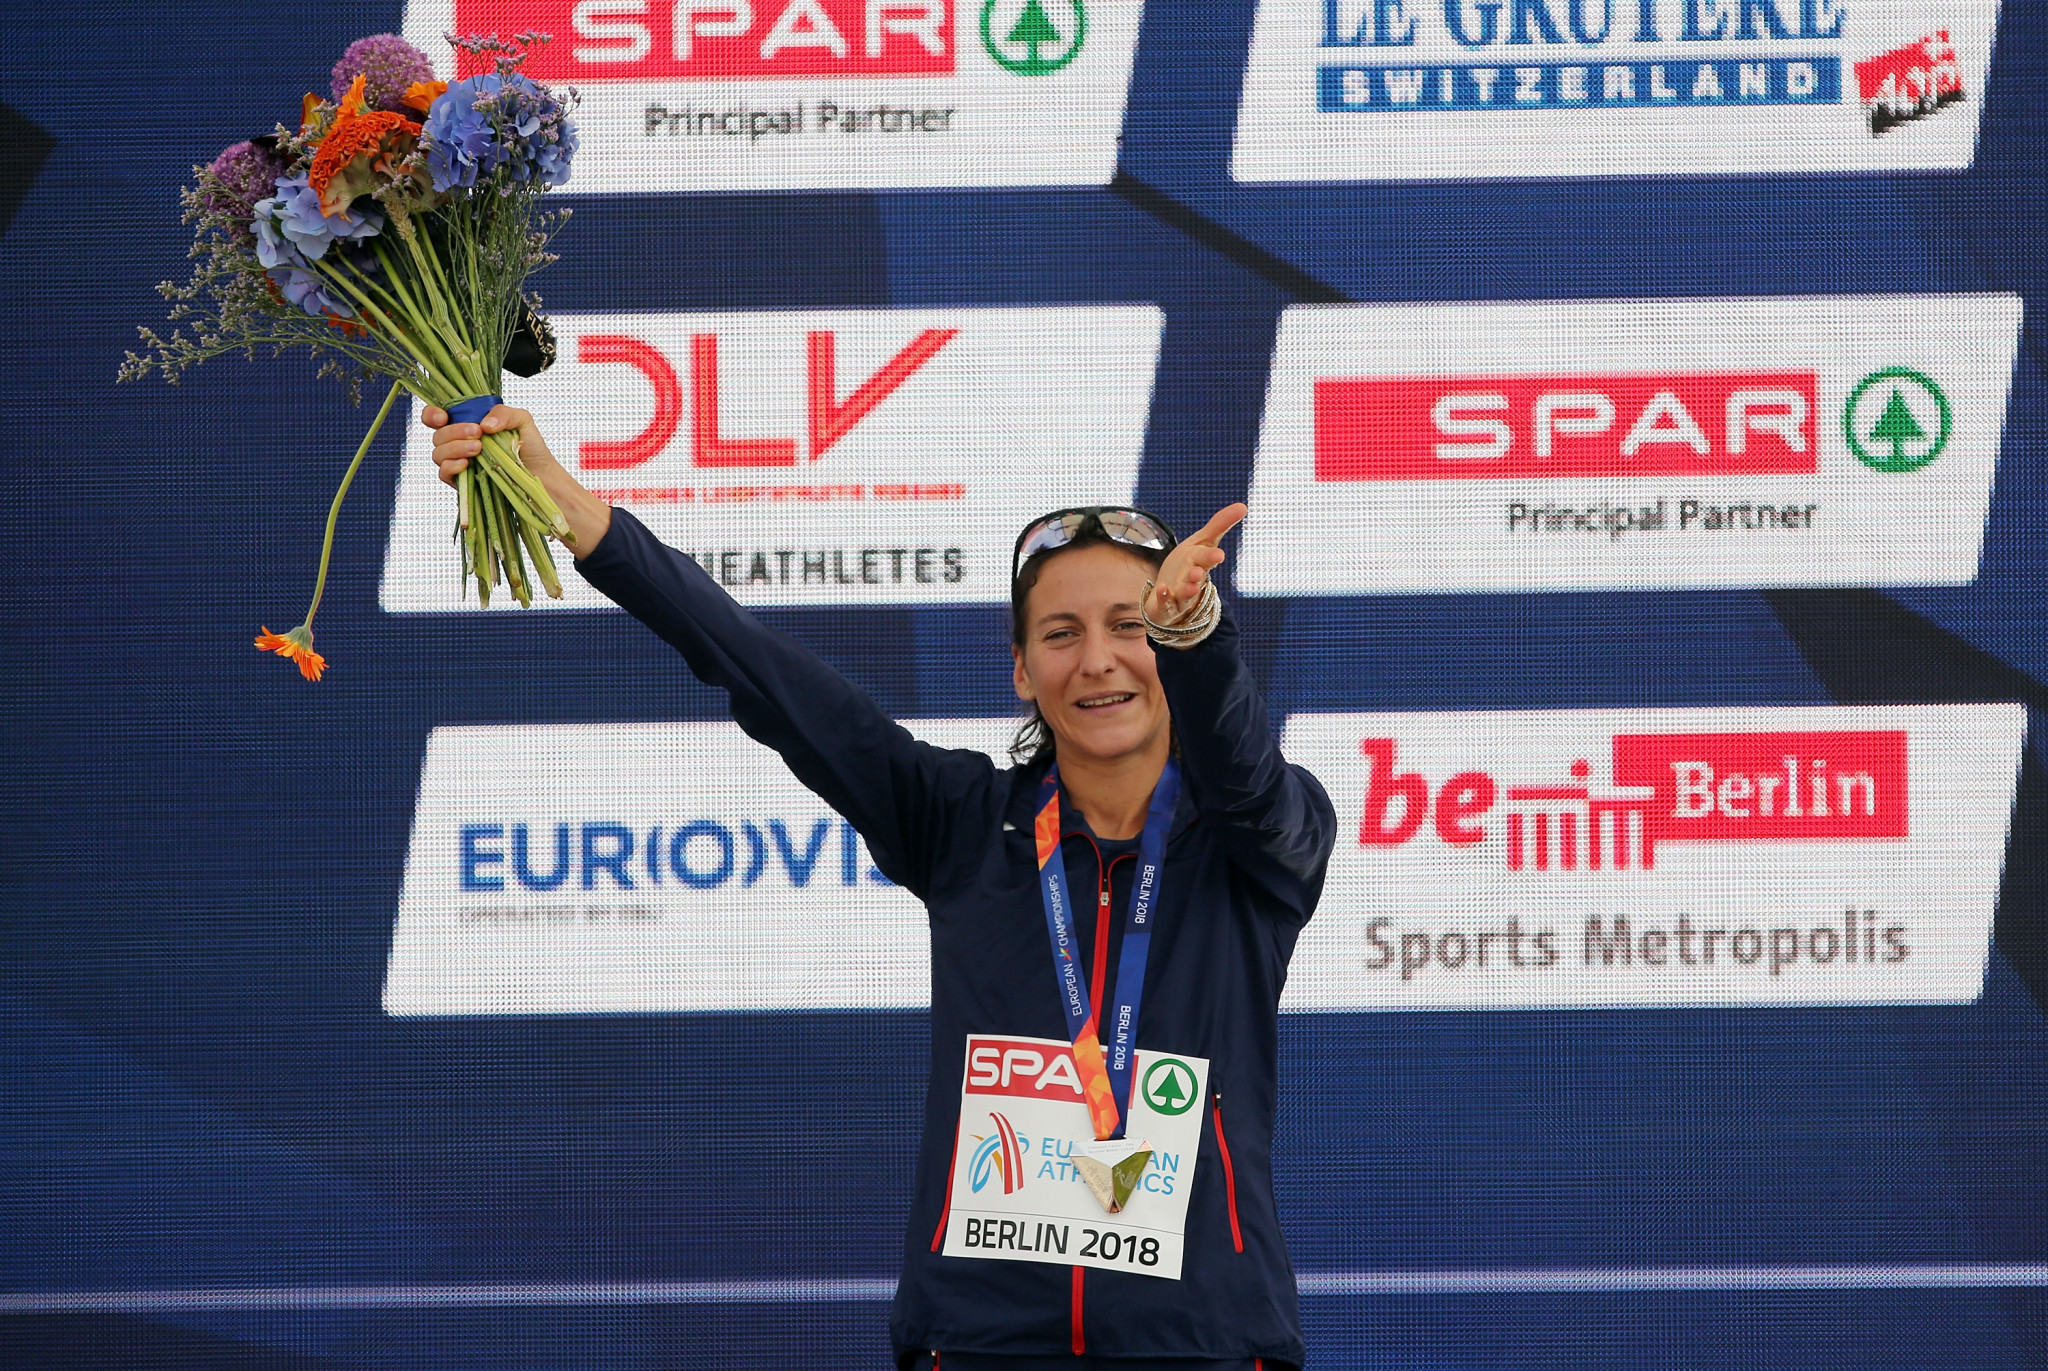 France's Clemence Calvin took silver in the women's marathon at the 2018 European Athletics Championships in Berlin ©Getty Images